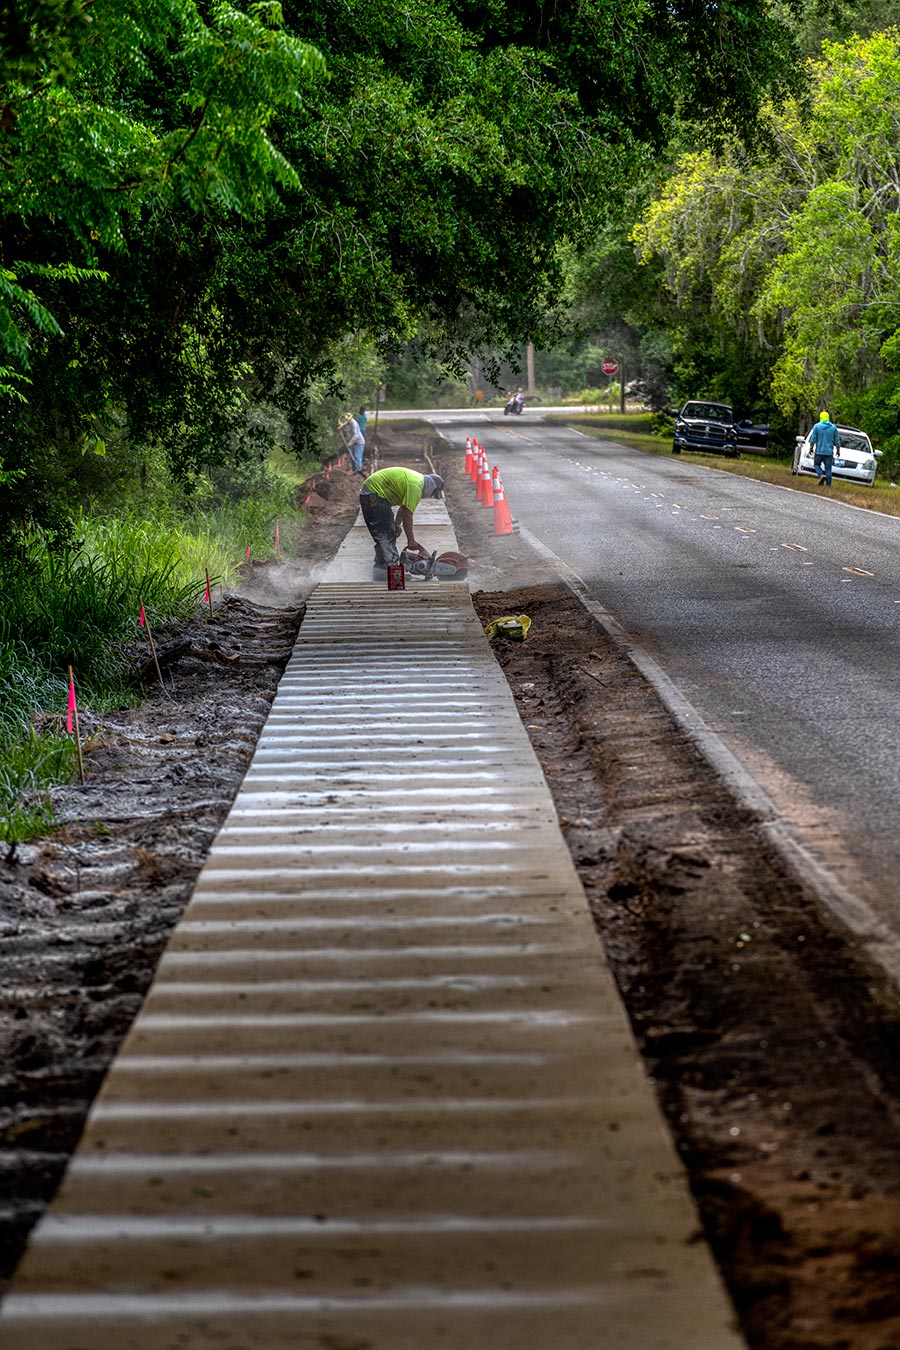 Construction of site sidewalks along Sligh Ave. are in progress at Resurrection Cemetery, 10668 East Sligh Ave., Seffner, FL 33610 (East Sligh Ave. and Williams Road).